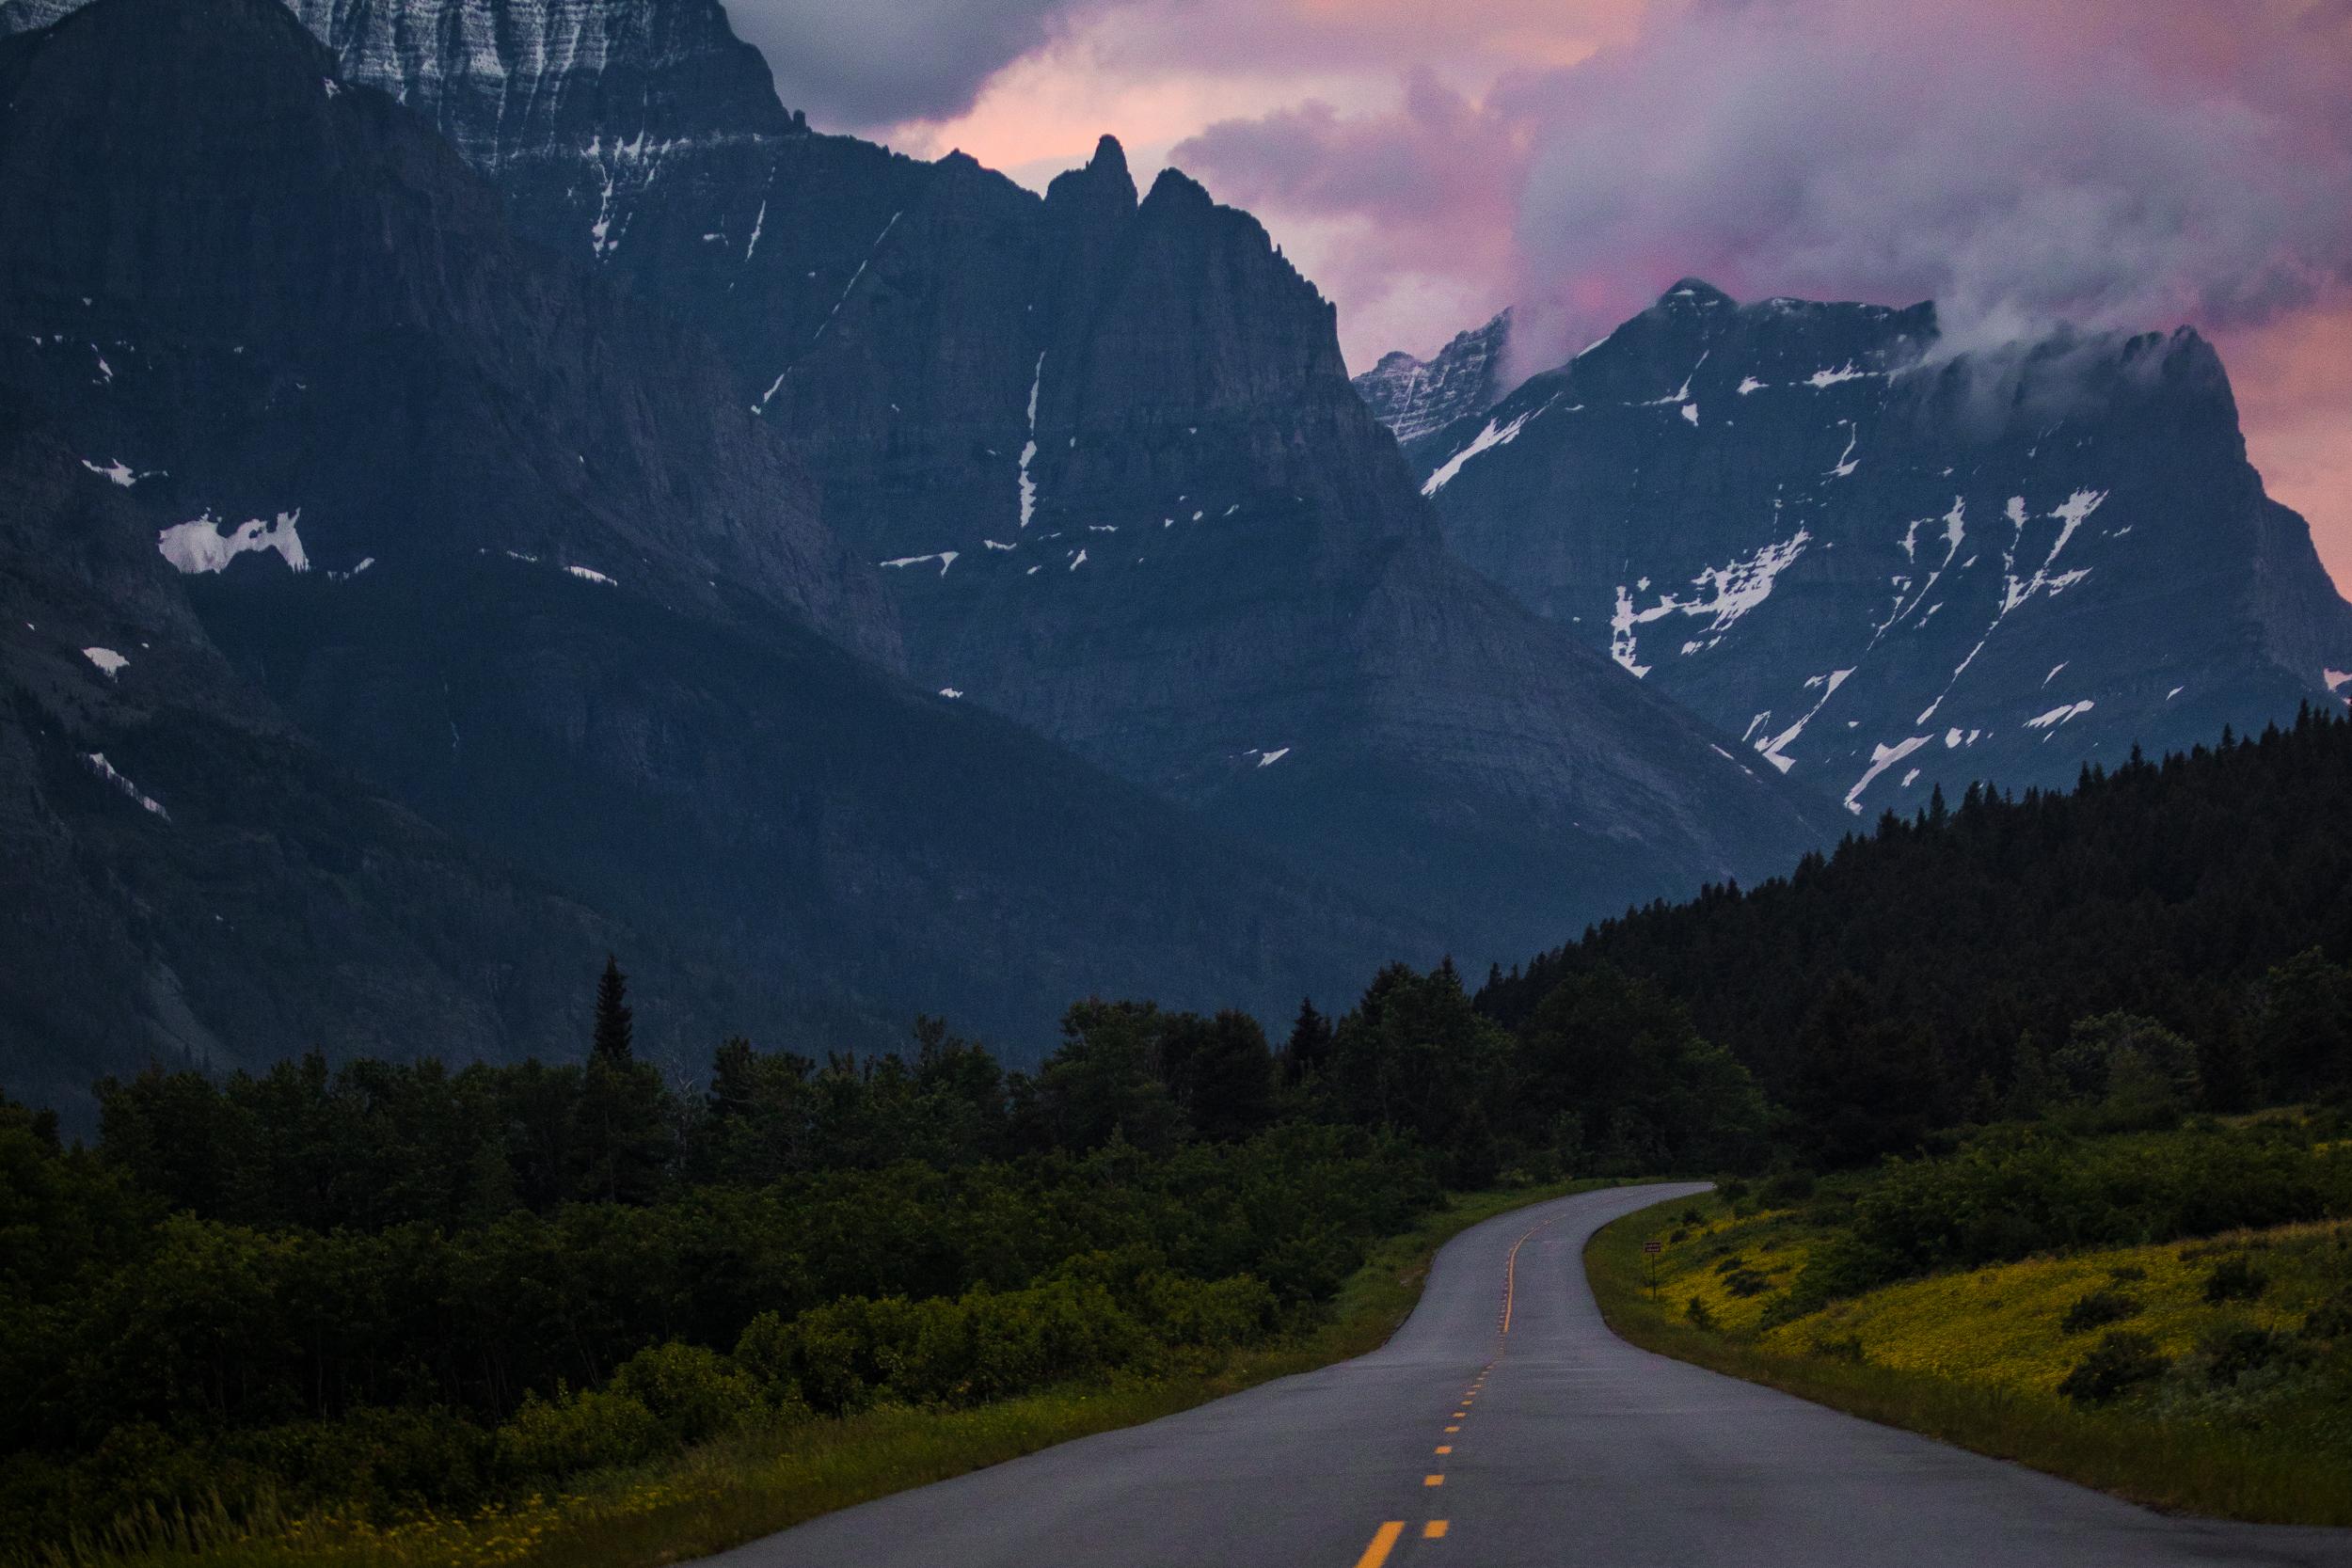 Jagged peaks rise out of a forested valley and an empty road curves off into the distance.